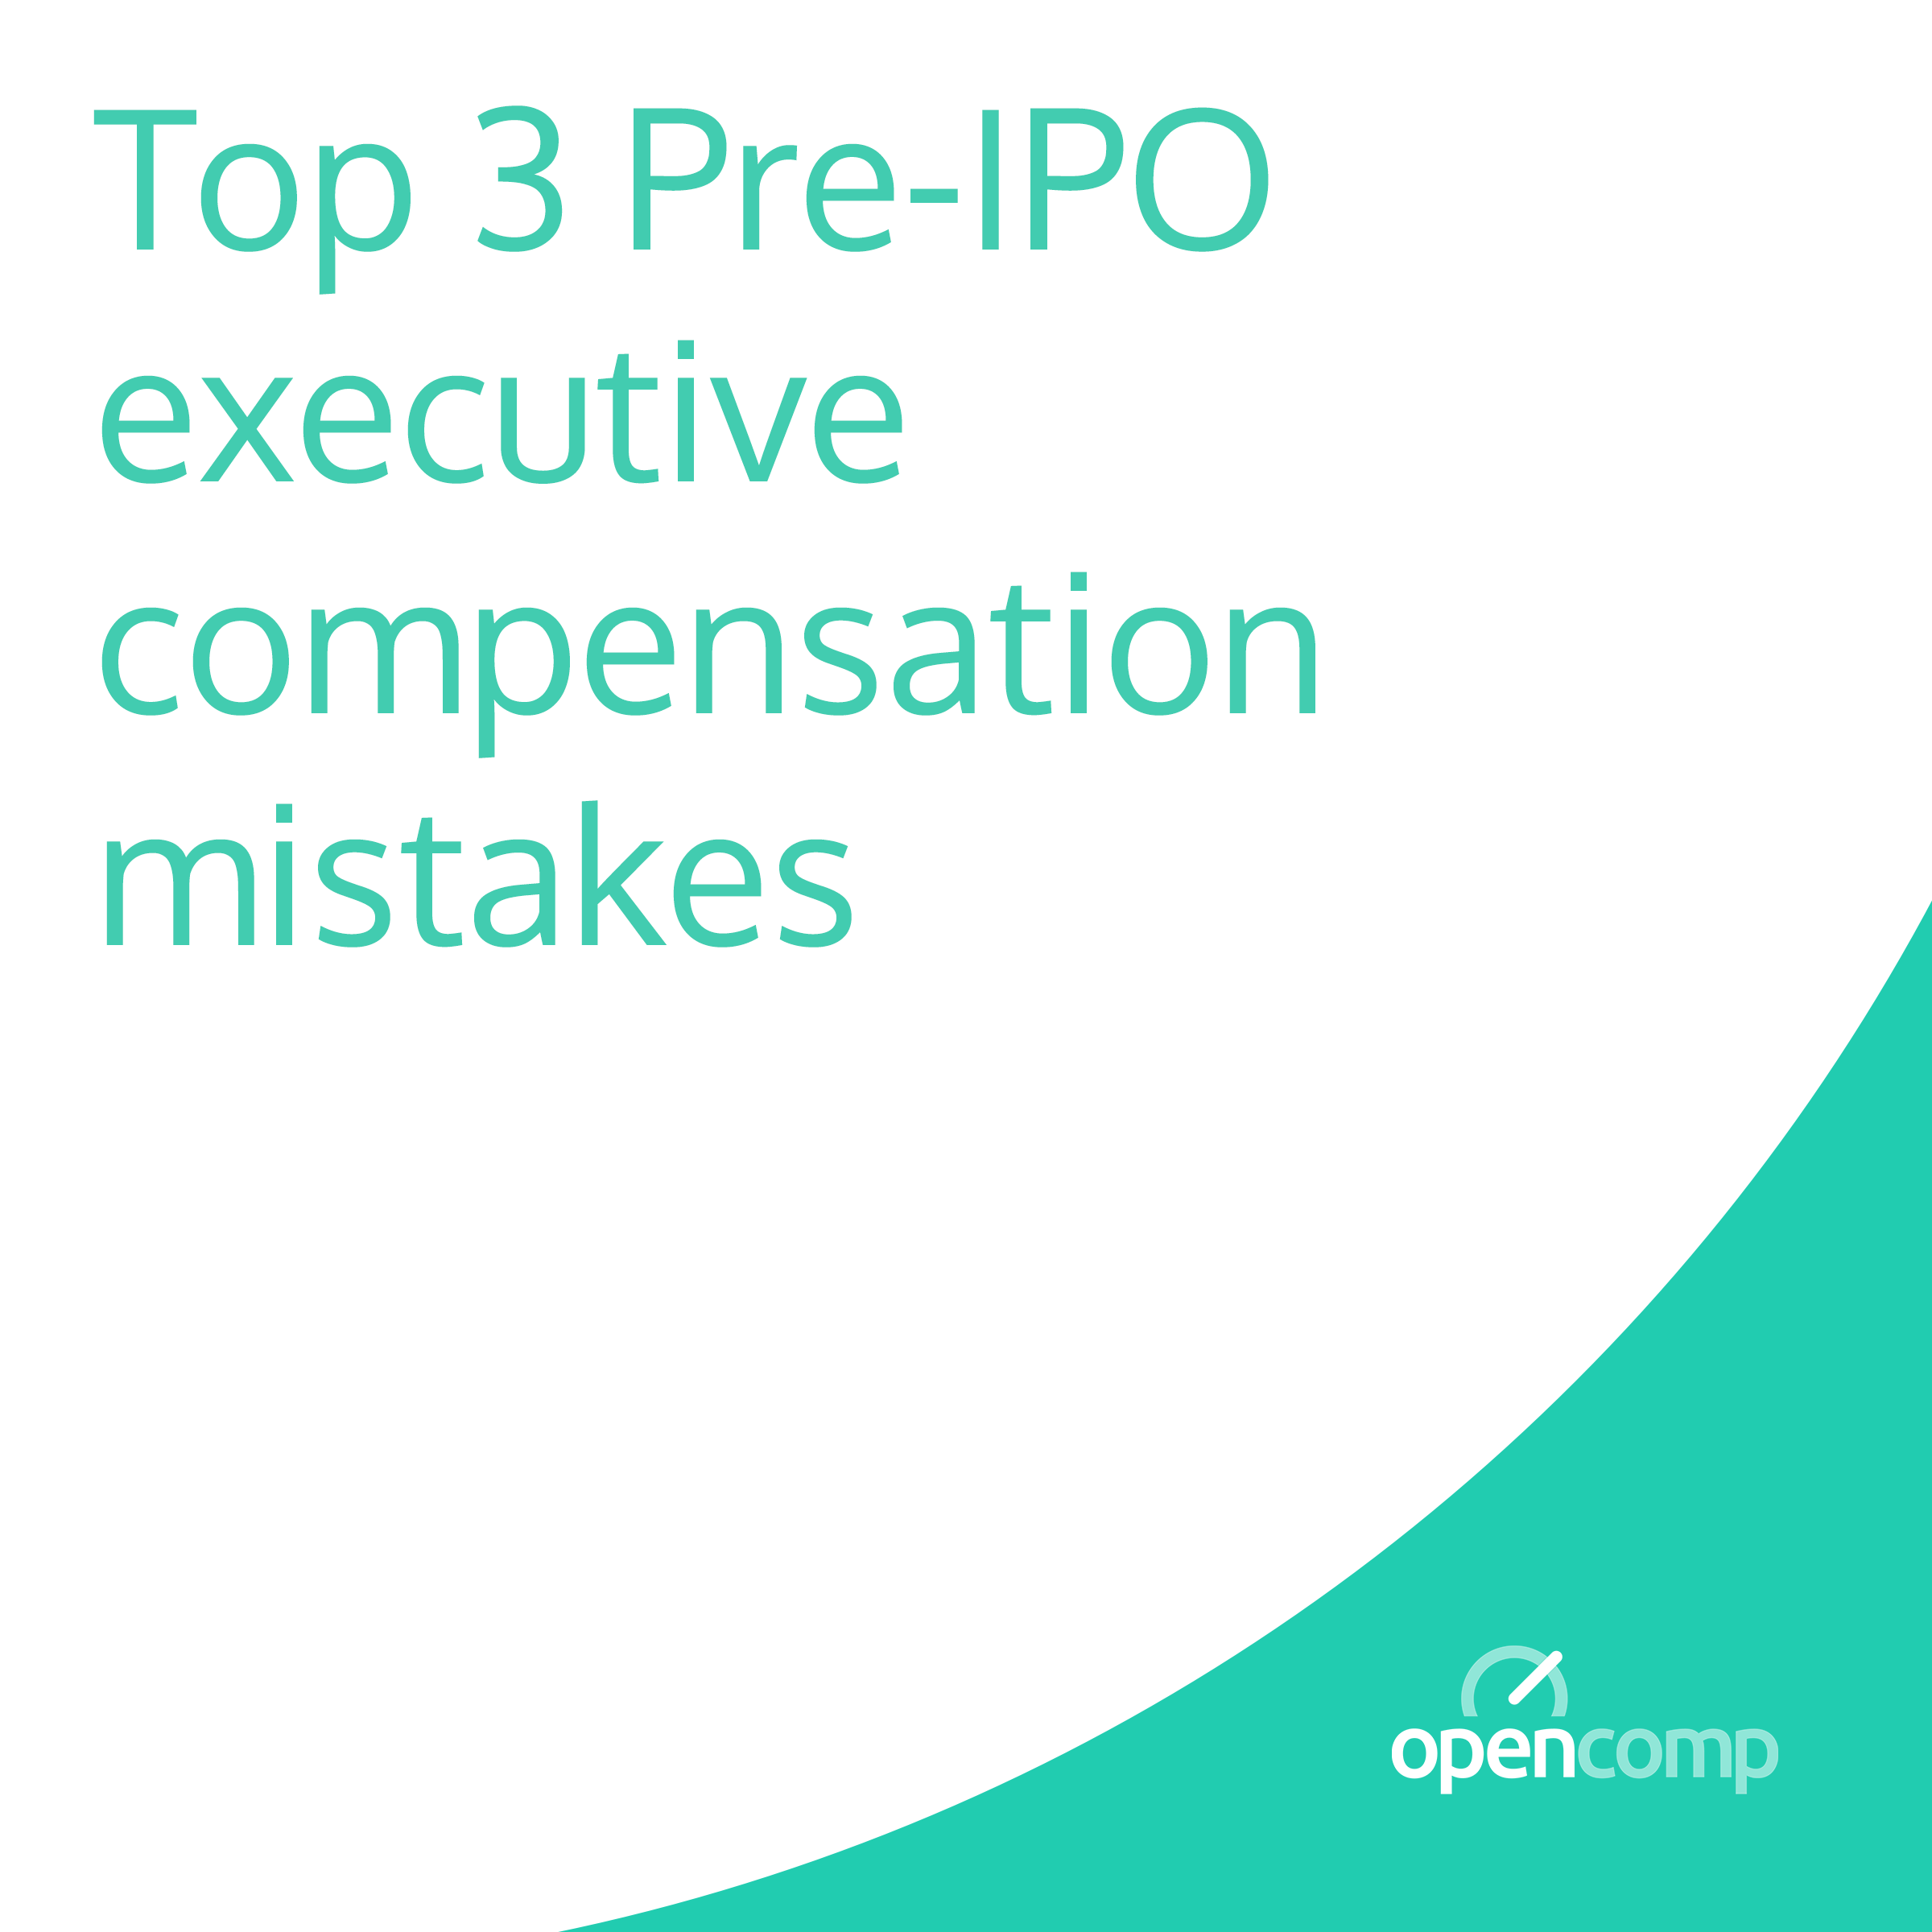 Startups’ Top Executive Compensation Mistakes before IPO